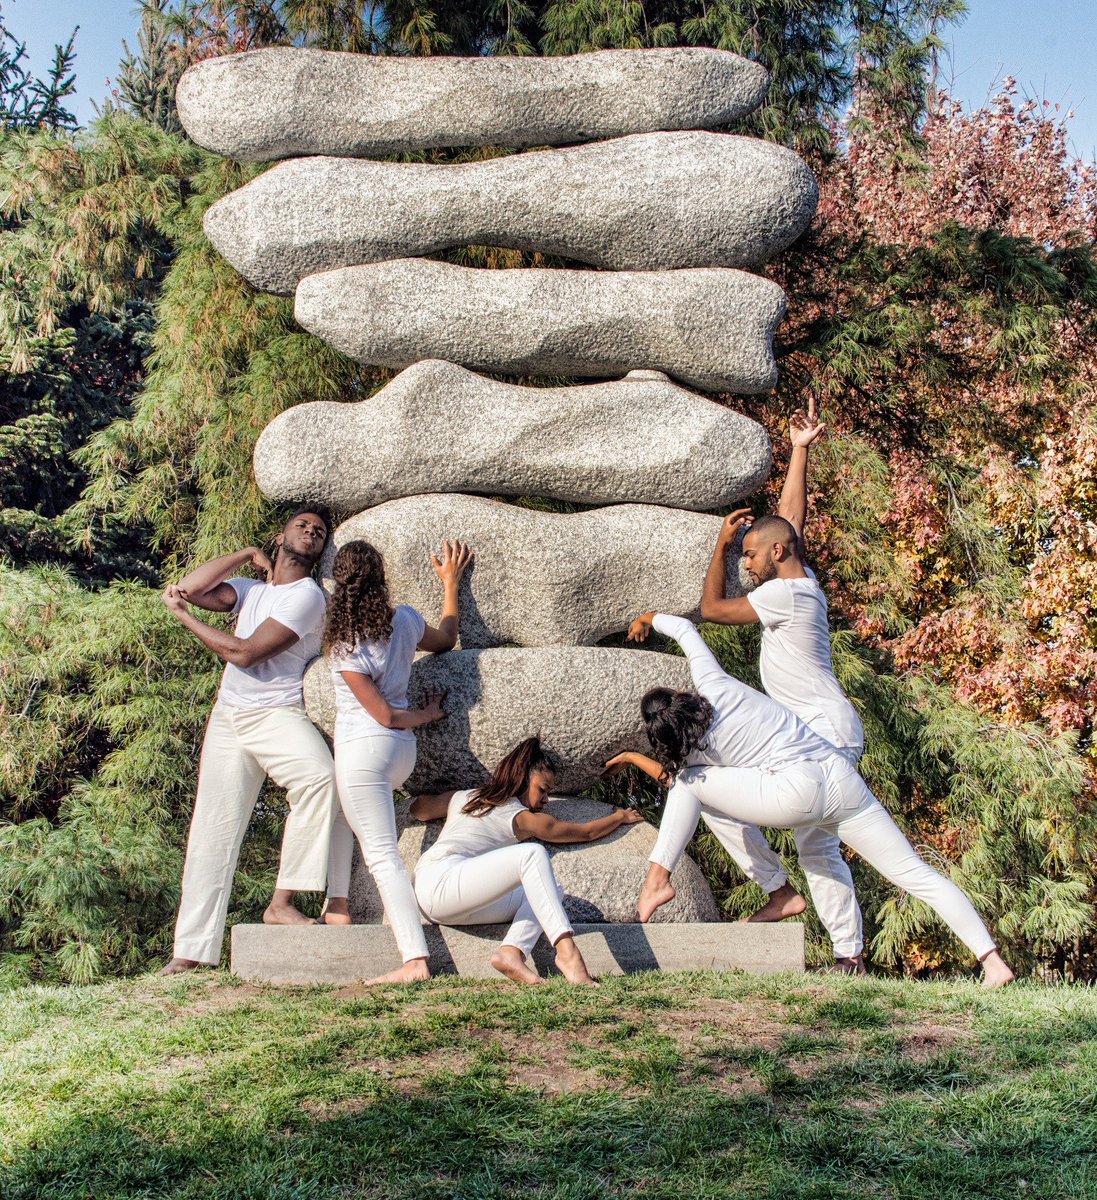 OPEN CALL: The Outlet Dance Project seeks Choreography & Dance Films for its 14th Annual Festival. Deadline – August 1. More info at theoutletdanceproject.com.  #dancefestival #sitespecific #dancefilms #womenartists #NJarts #sculpture #groundsforsculpture #opencall